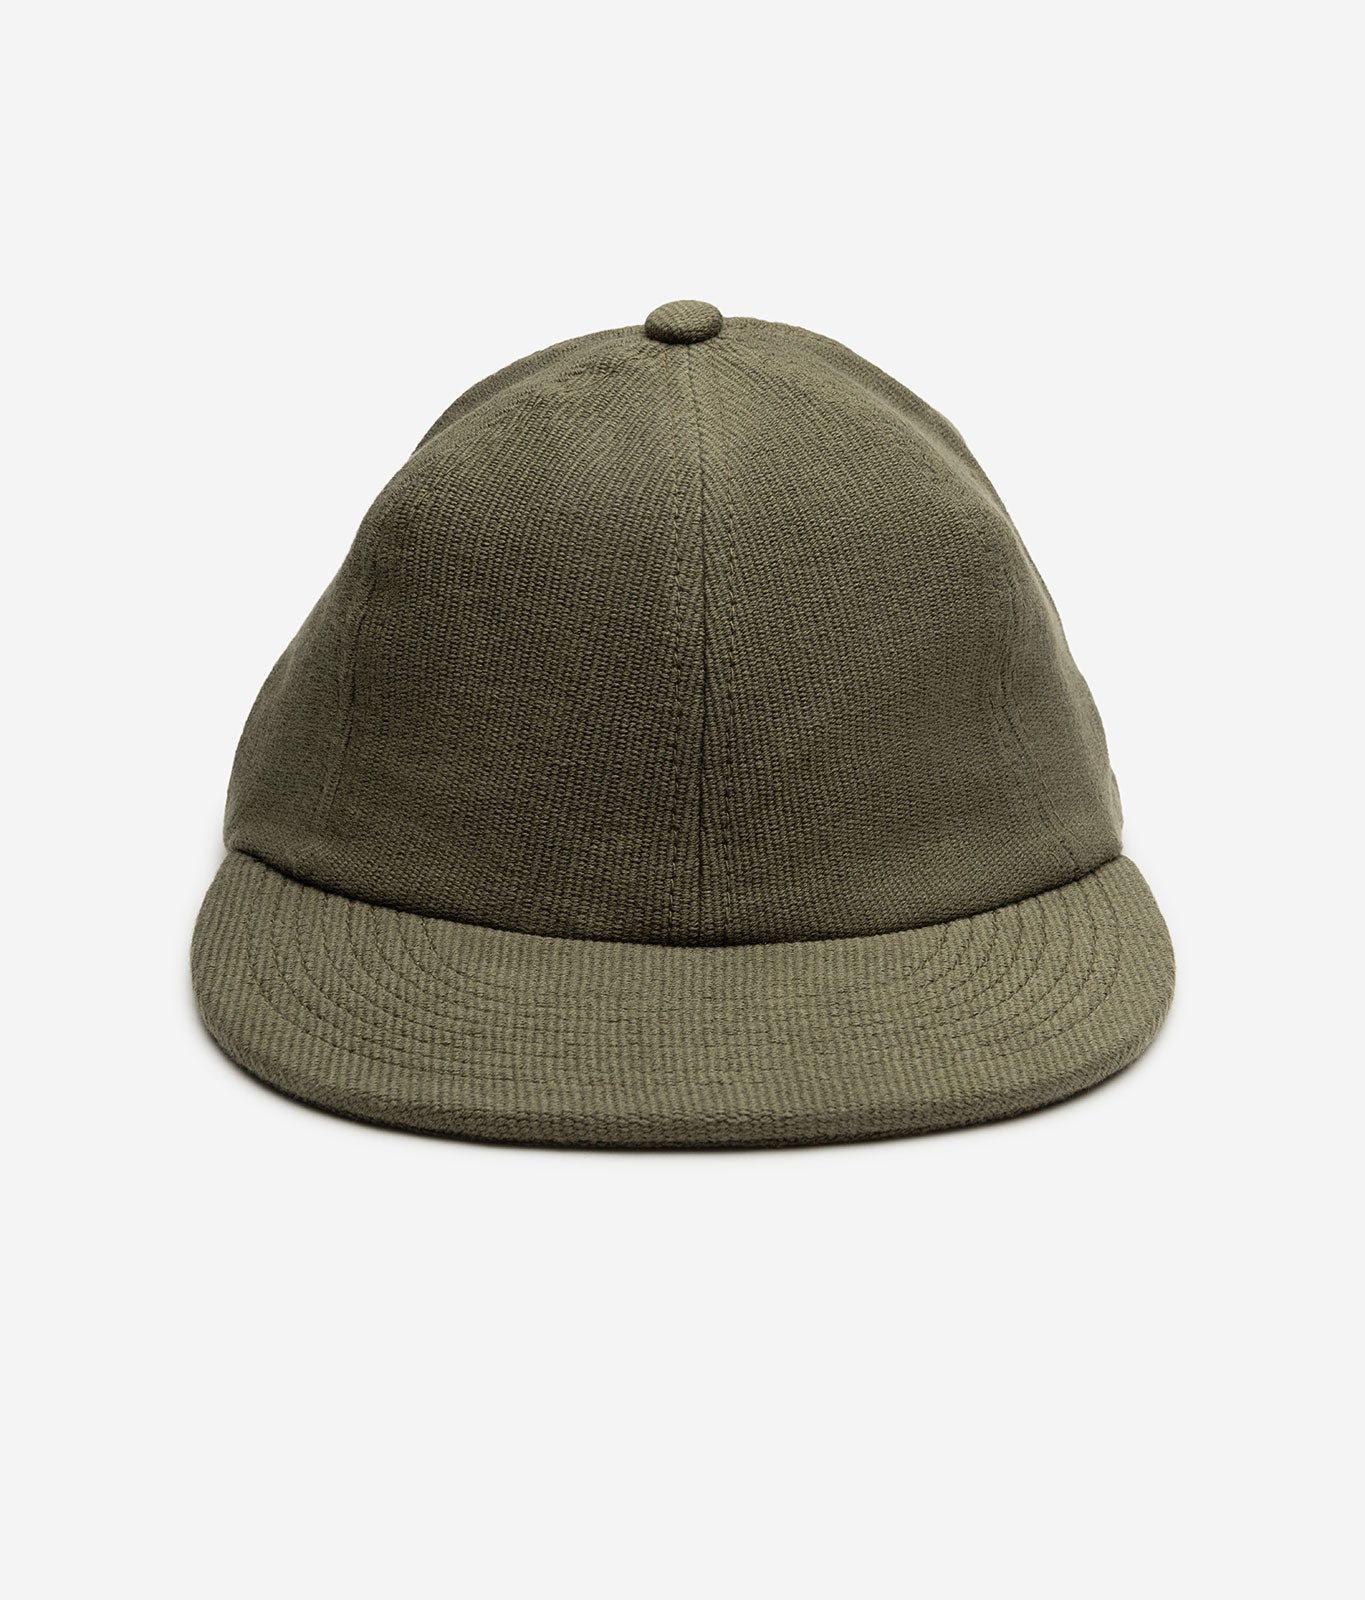 Stiksen 109 Canvas Ivy Flat Brim Cap from the front angle